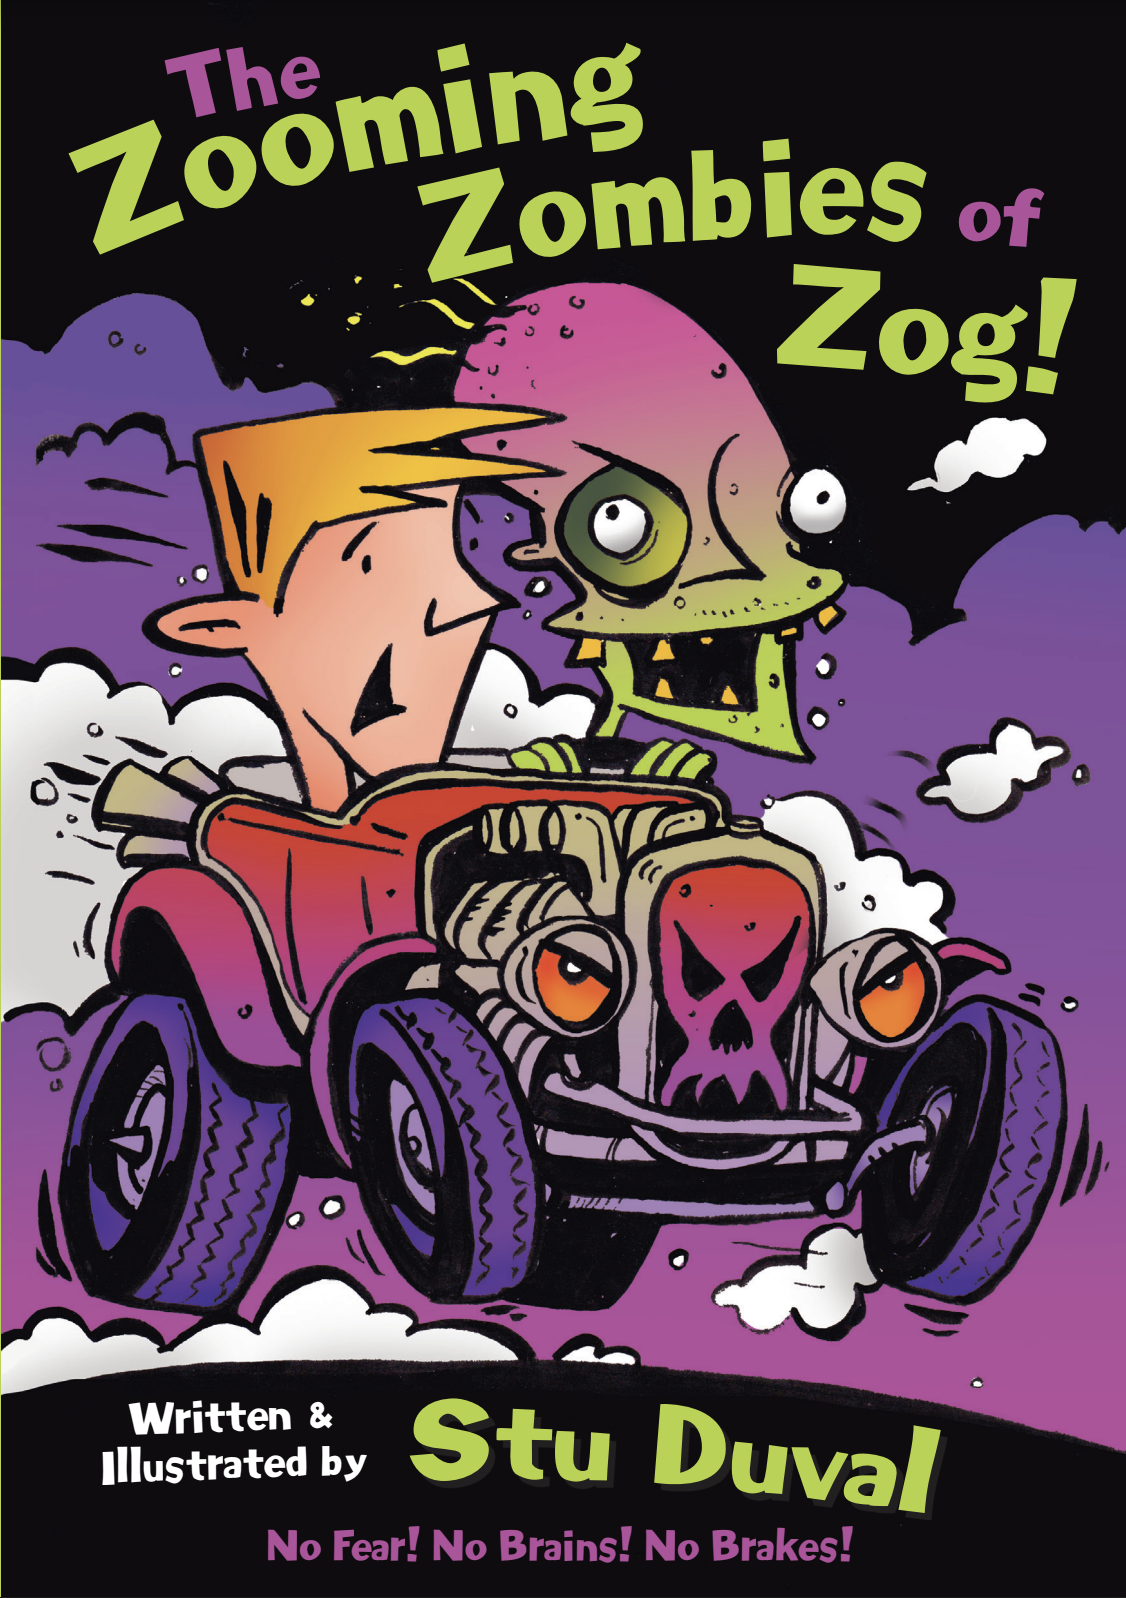 Zooming Zombies of Zog!